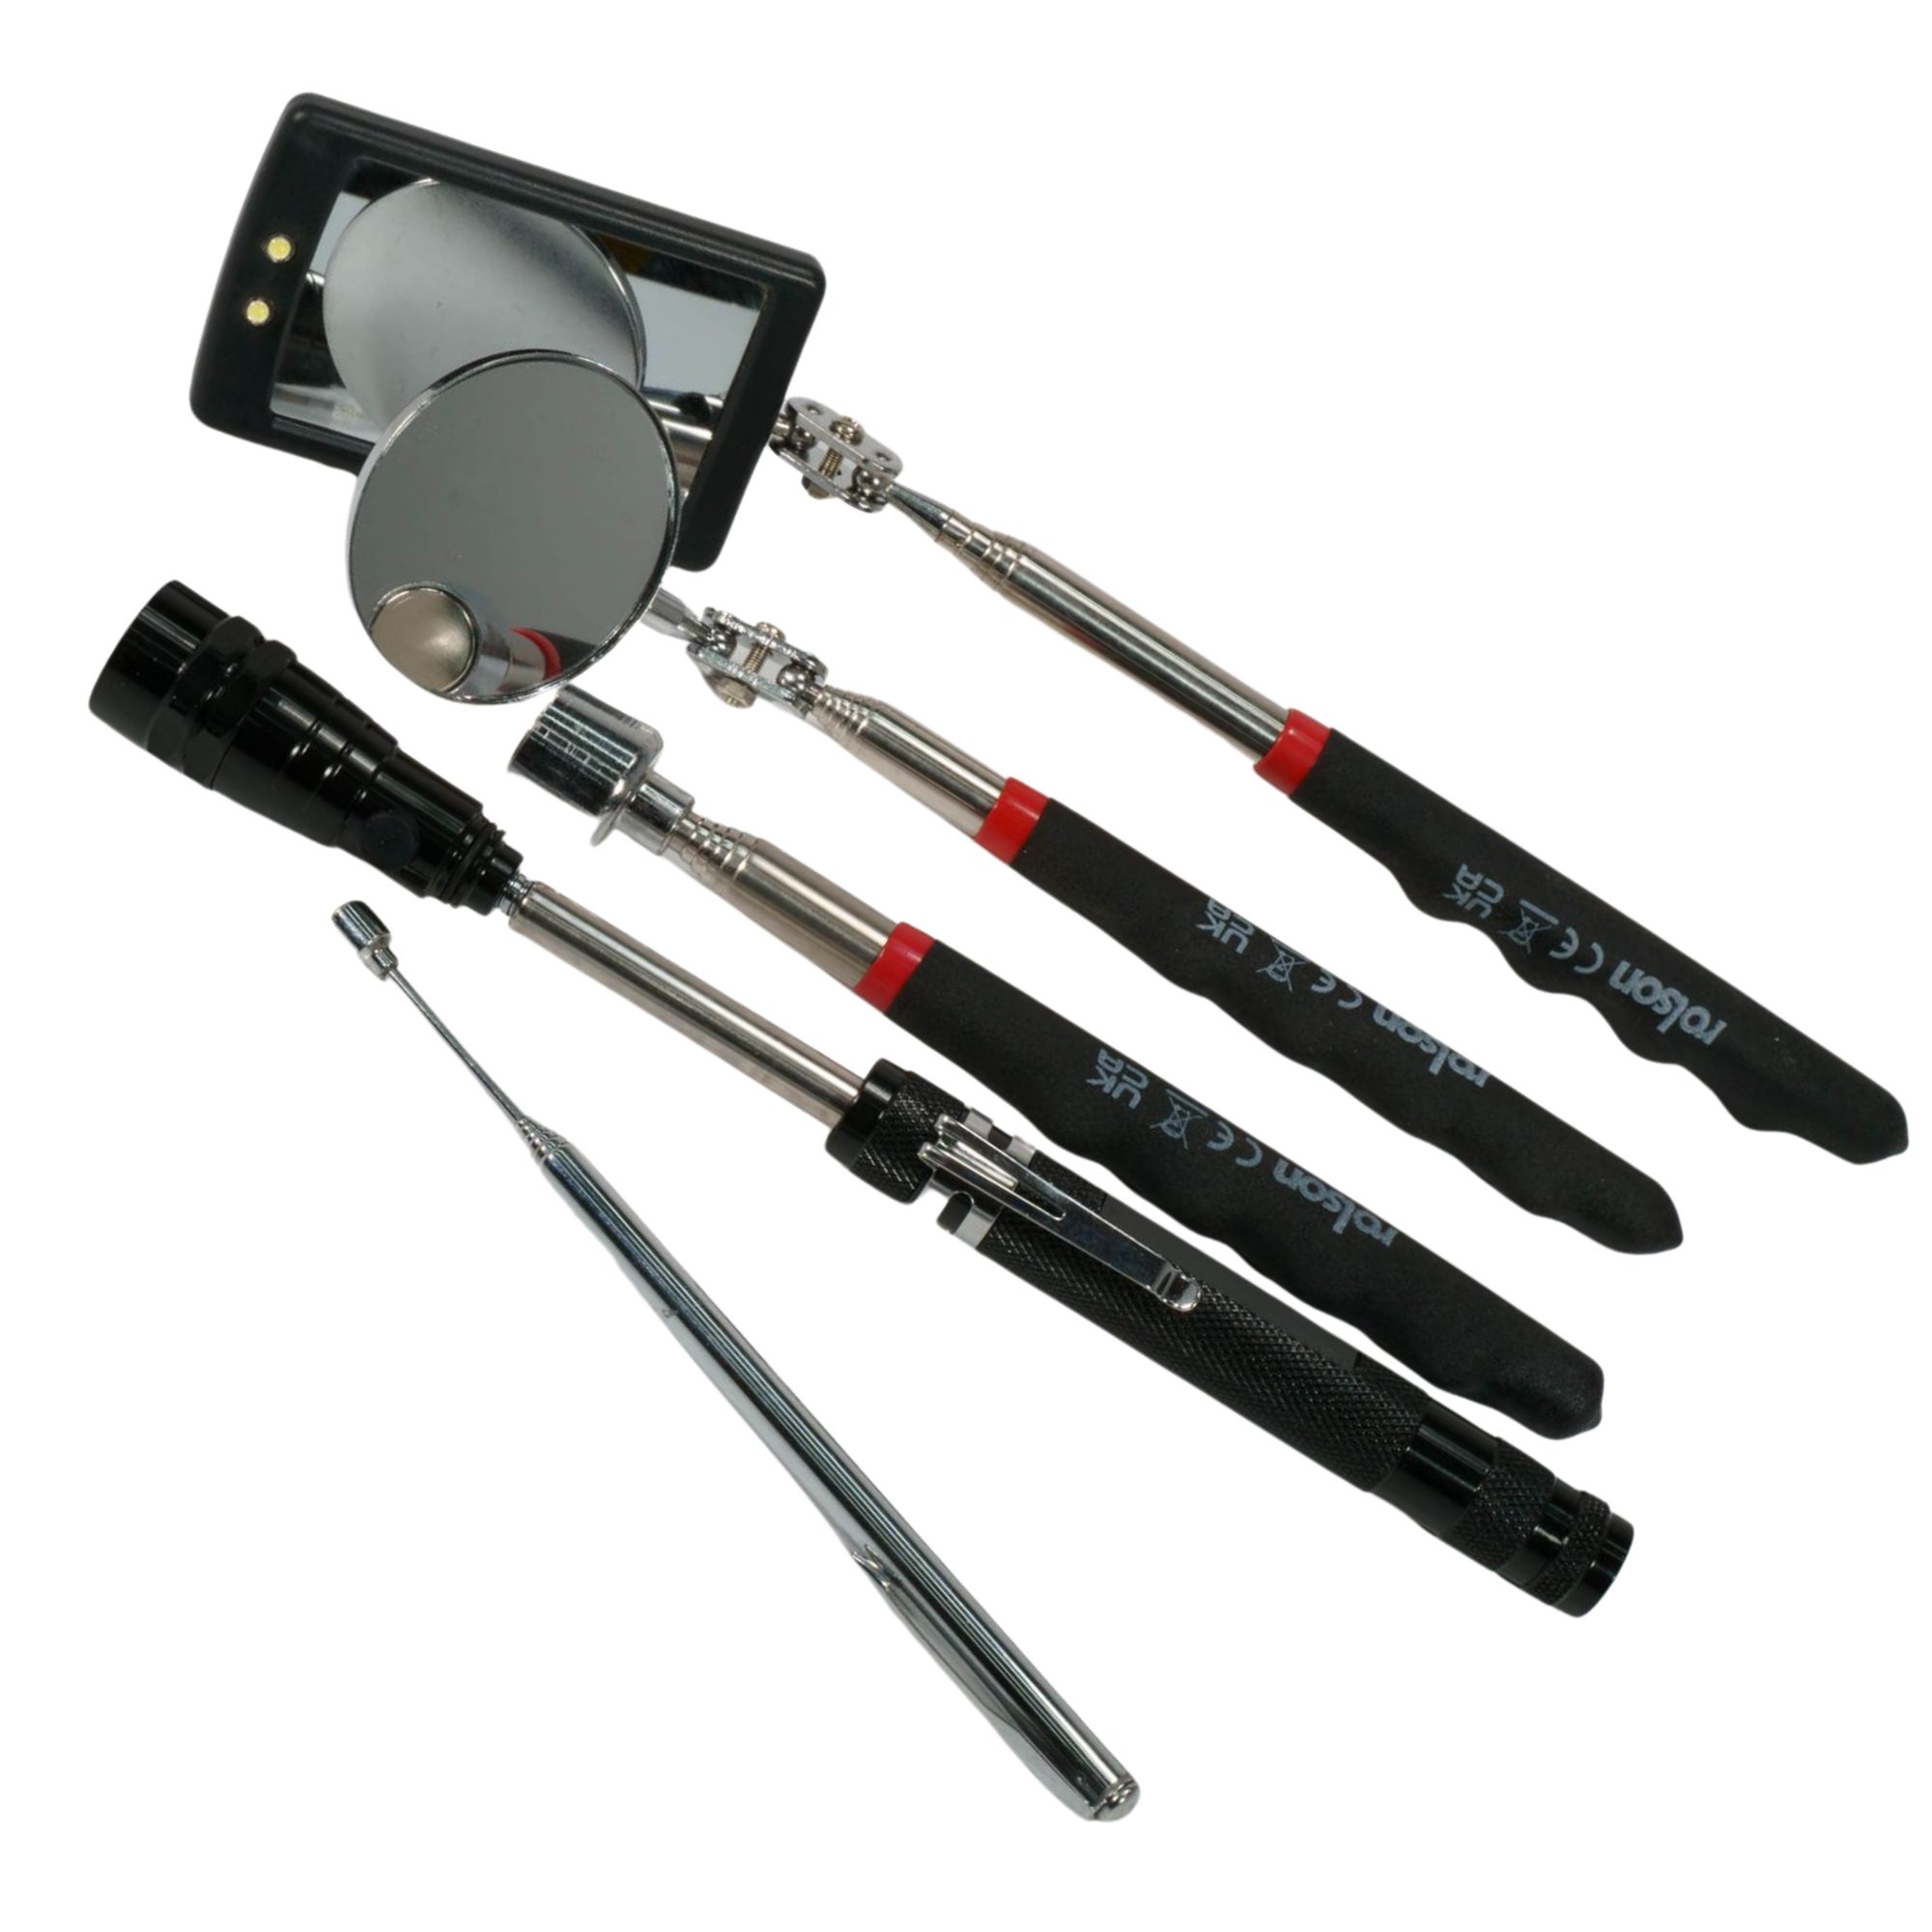 Mayhew, Inspection Tools, Inspection Hook and Pick Kits - TeleMag Tool Kit  1000